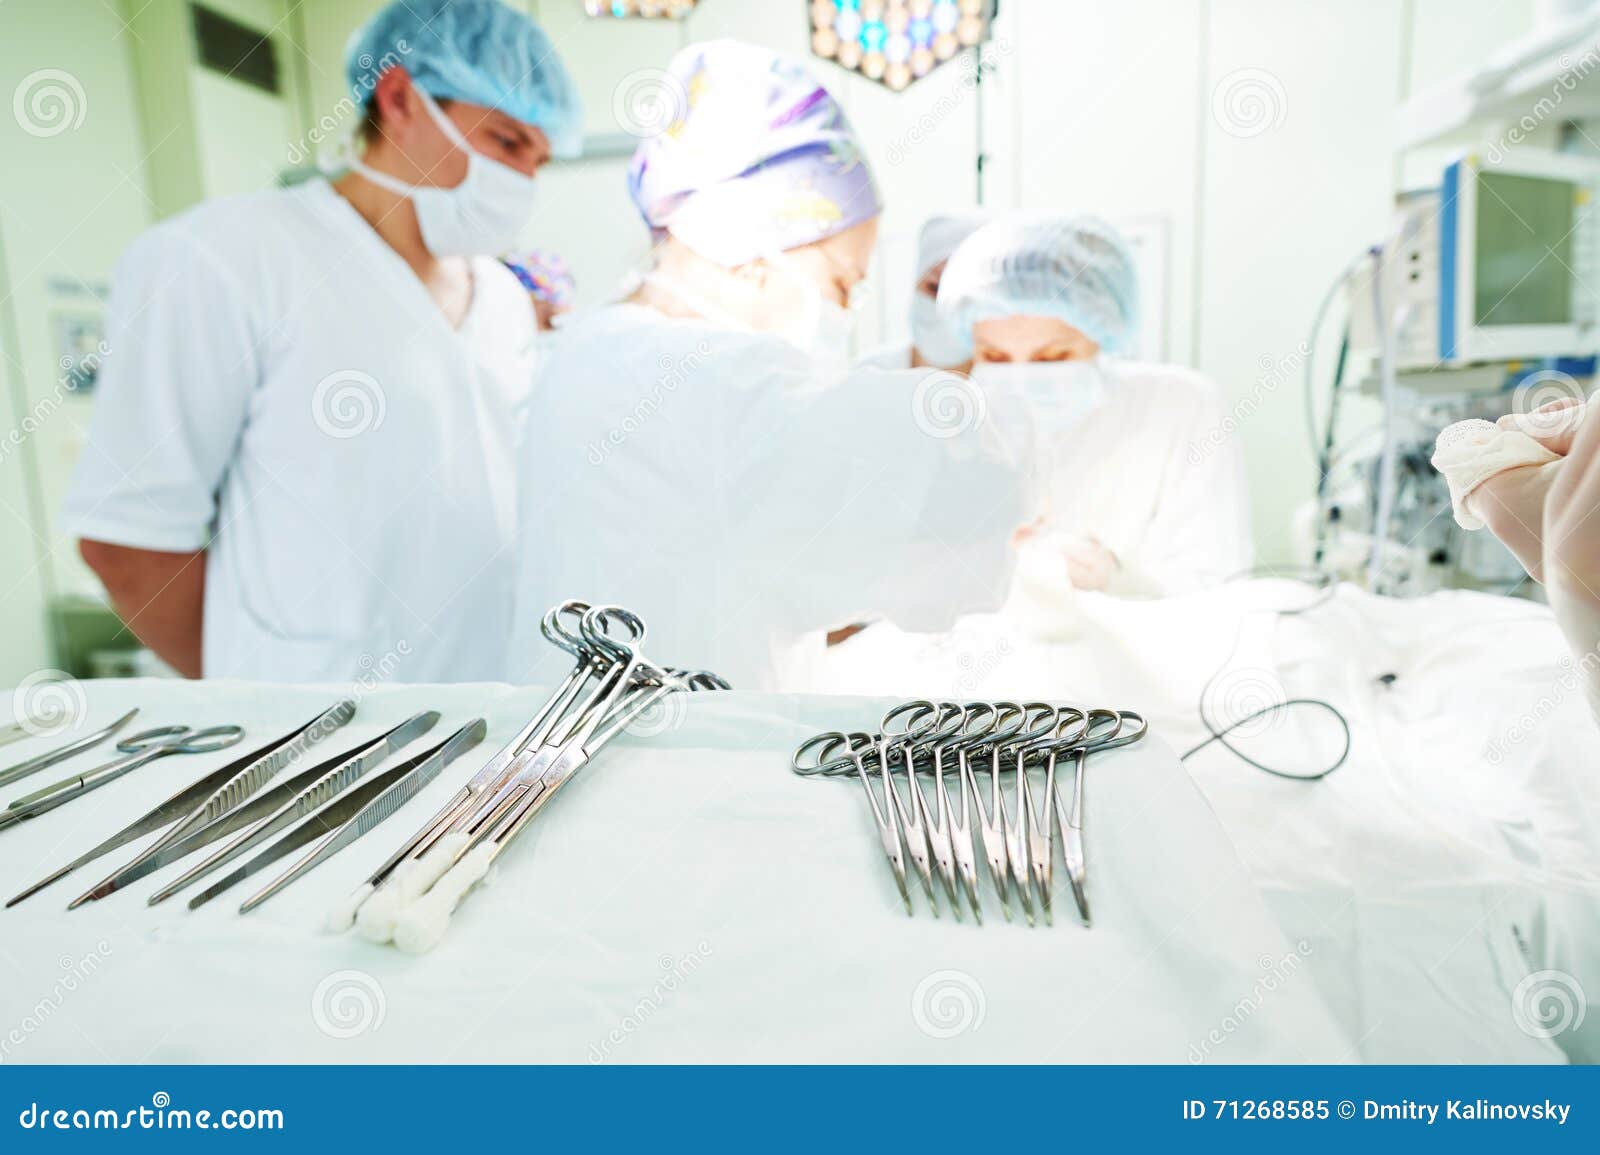 surgery and surgical tools at surgion operation in hospital